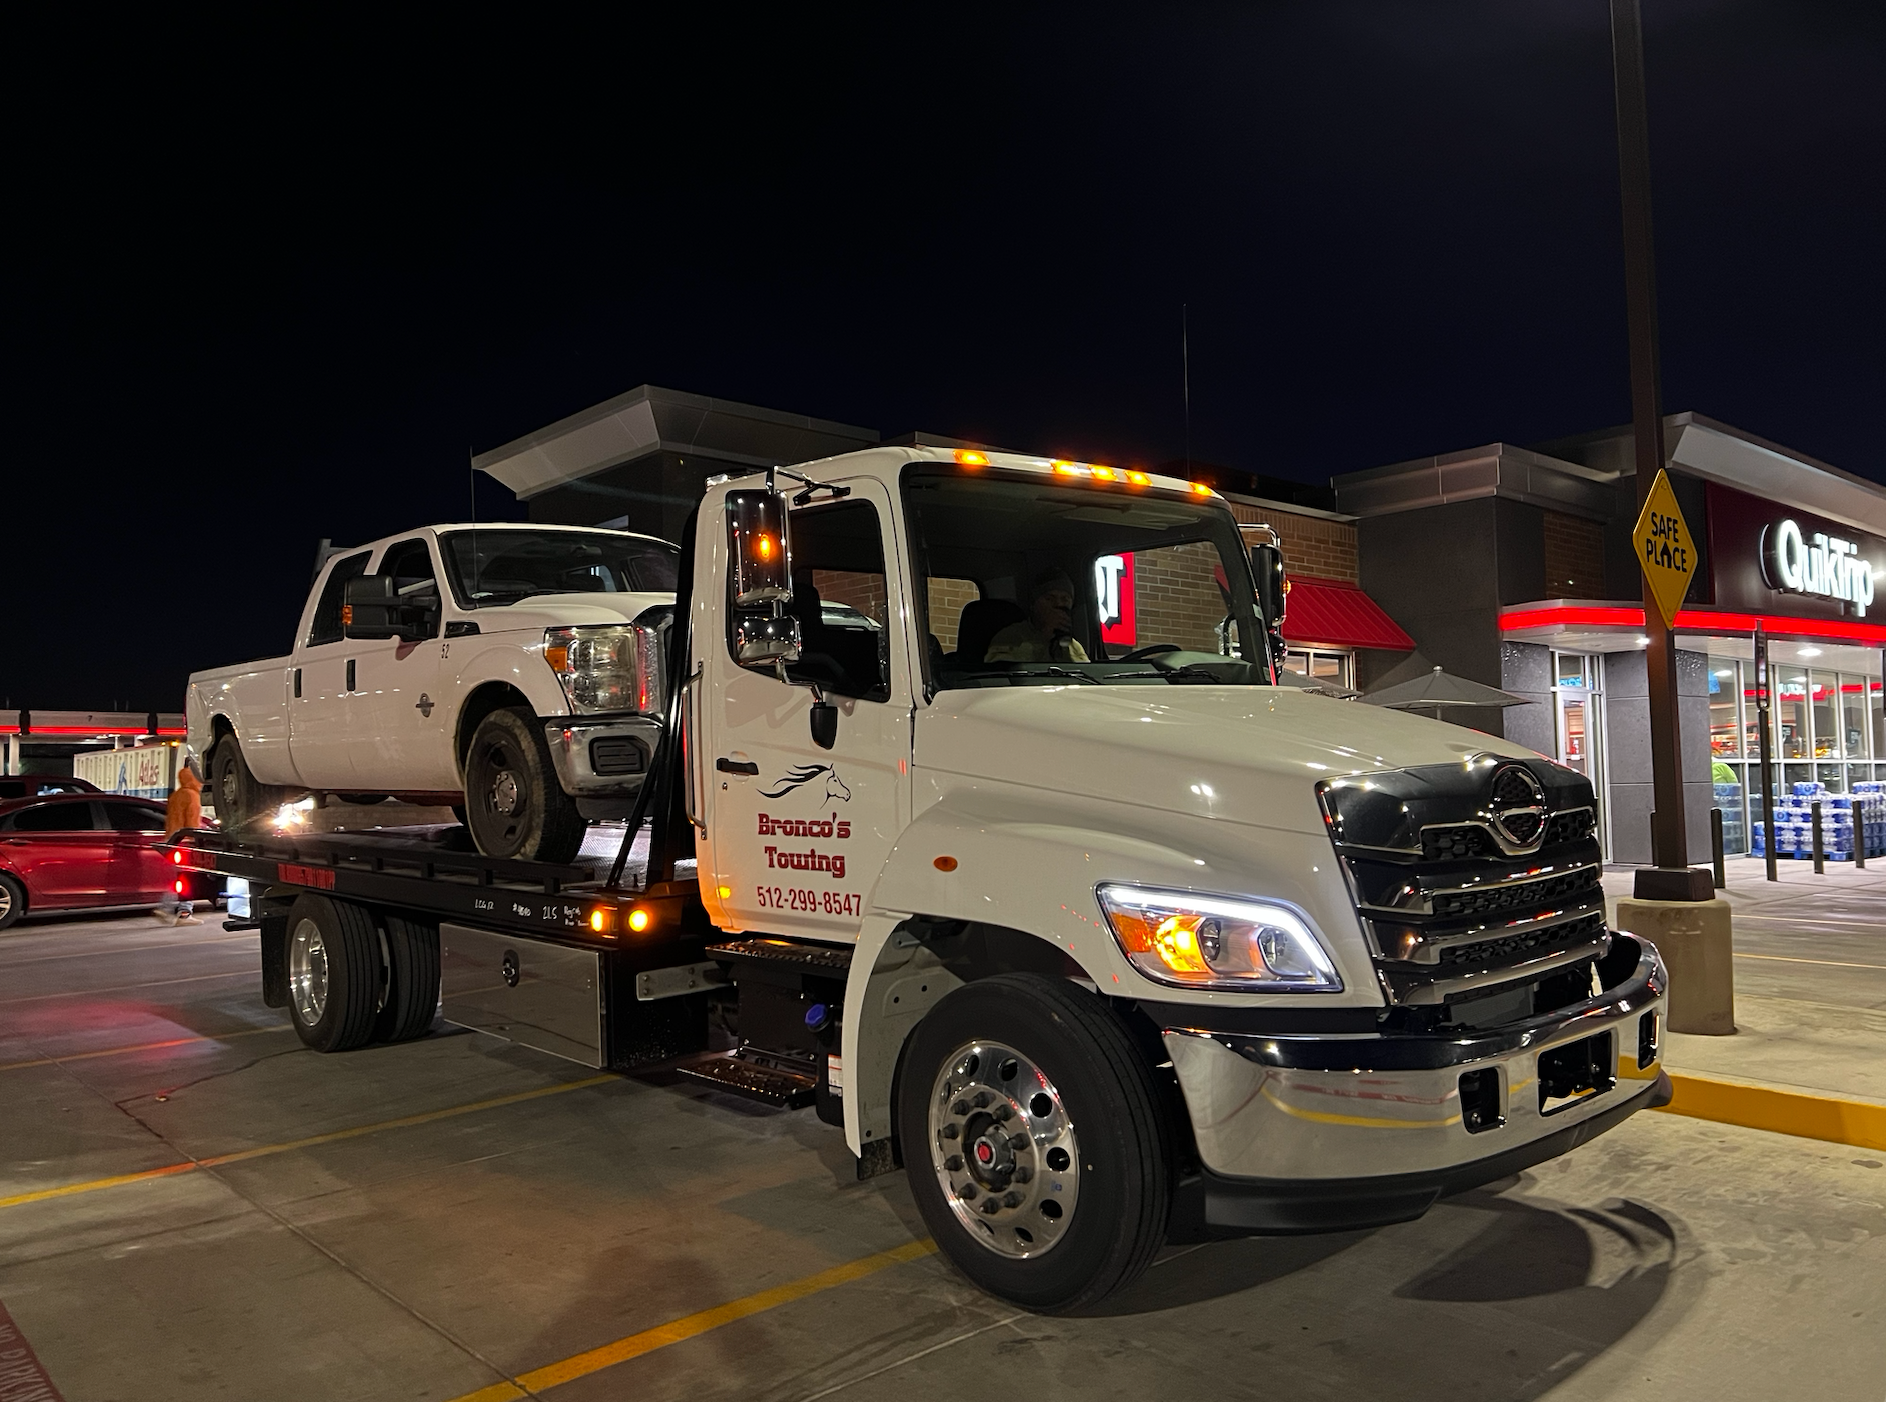 Bronco’s Towing Towing.com Profile Banner